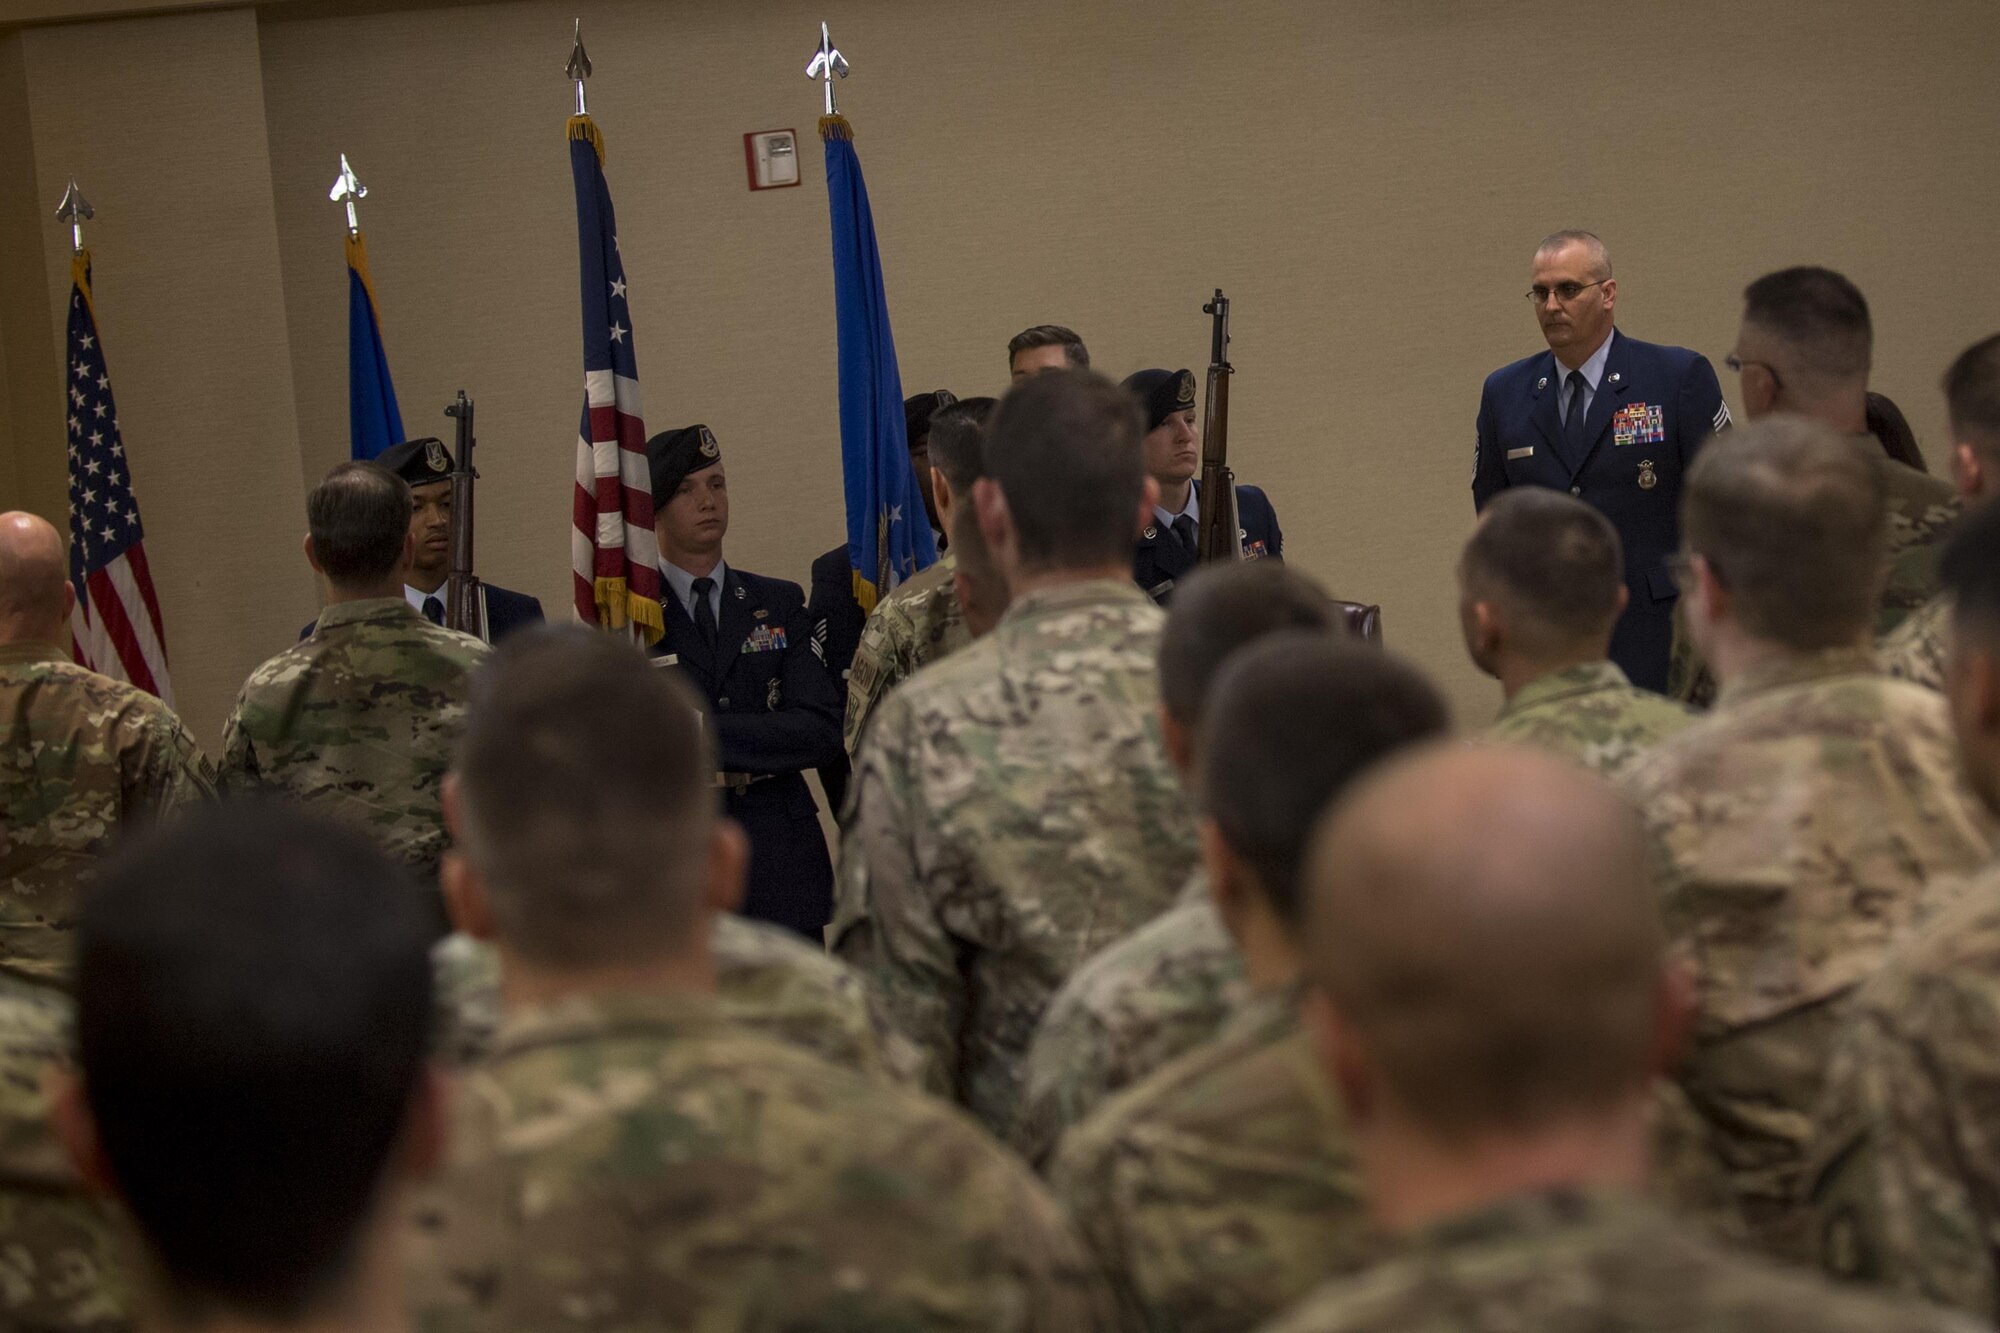 Airmen from the 820th Base Defense Group stand at attention during the presentation of the colors at a retirement ceremony for Chief Master Sgt. David Houtz, 823d Base Defense Squadron chief enlisted manager, Dec. 1, 2017, at Moody Air Force Base, Ga. Houtz enlisted in the Air Force on Oct. 6, 1991. During his 27-year career, he has held numerous leadership roles while supporting Operations Provide Promise, Southern Watch, Enduring Freedom, Iraqi Freedom and Inherent Resolve. (U.S. Air Force photo by Senior Airman Daniel Snider)